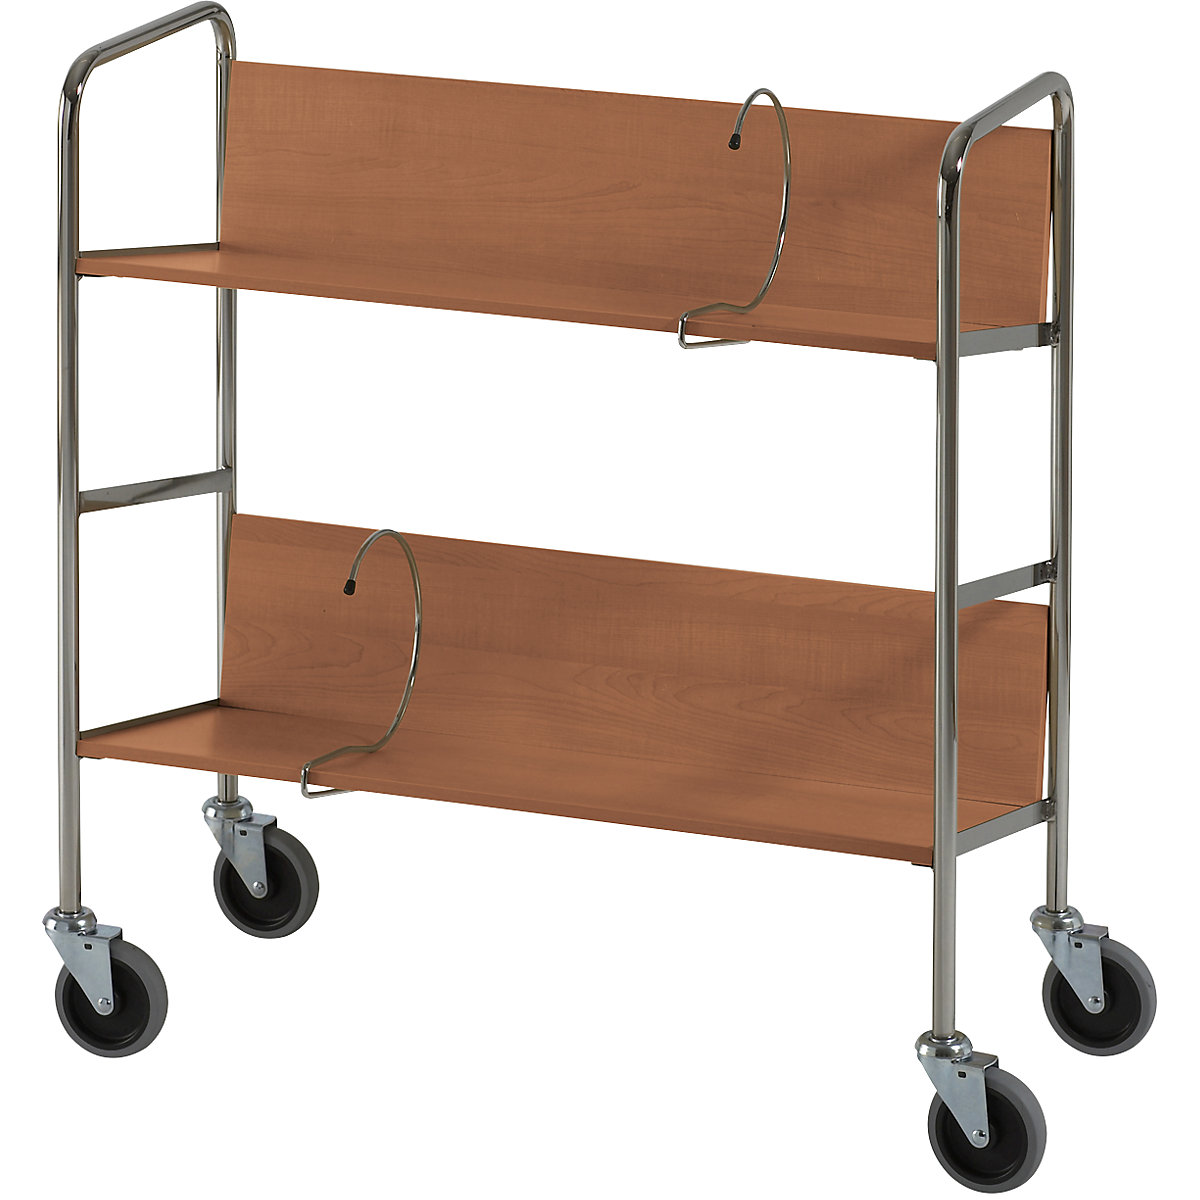 File trolley, chrome plated – HelgeNyberg, 2 shelves, LxWxH 800 x 340 x 840 mm, cherry finish, 5+ items-20